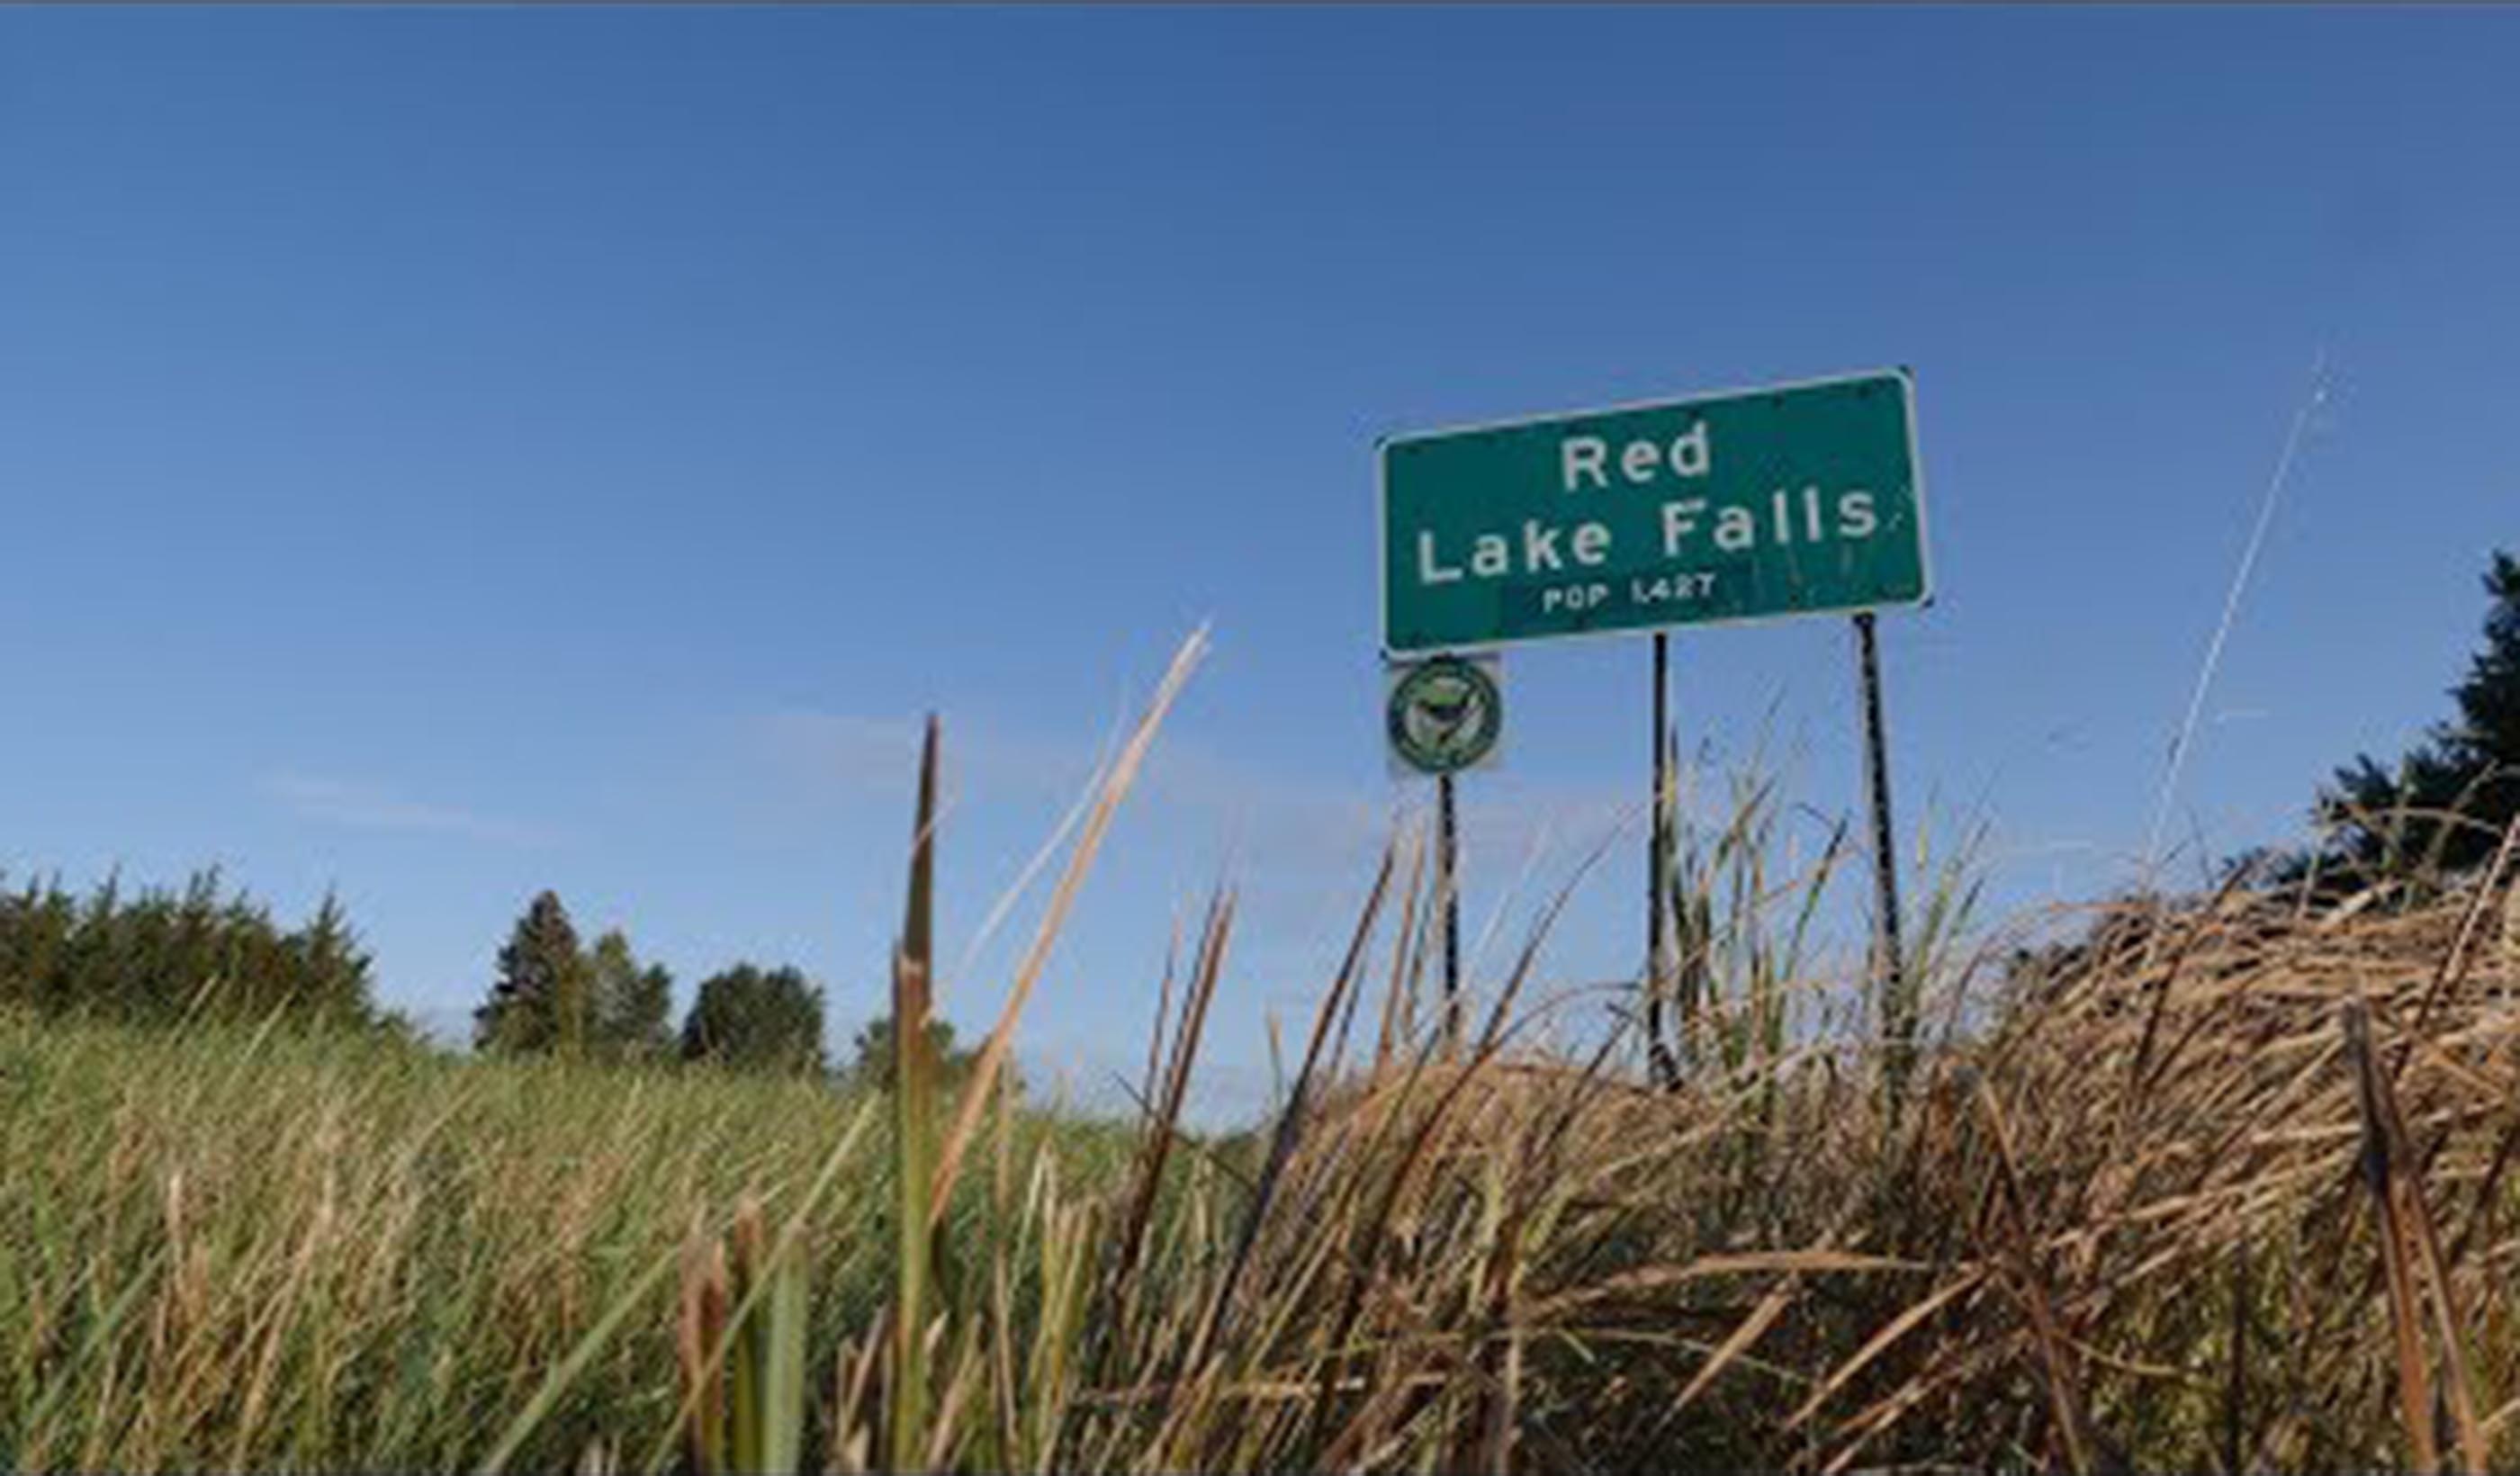 Getting Infrastructure Right in Red Lake Falls